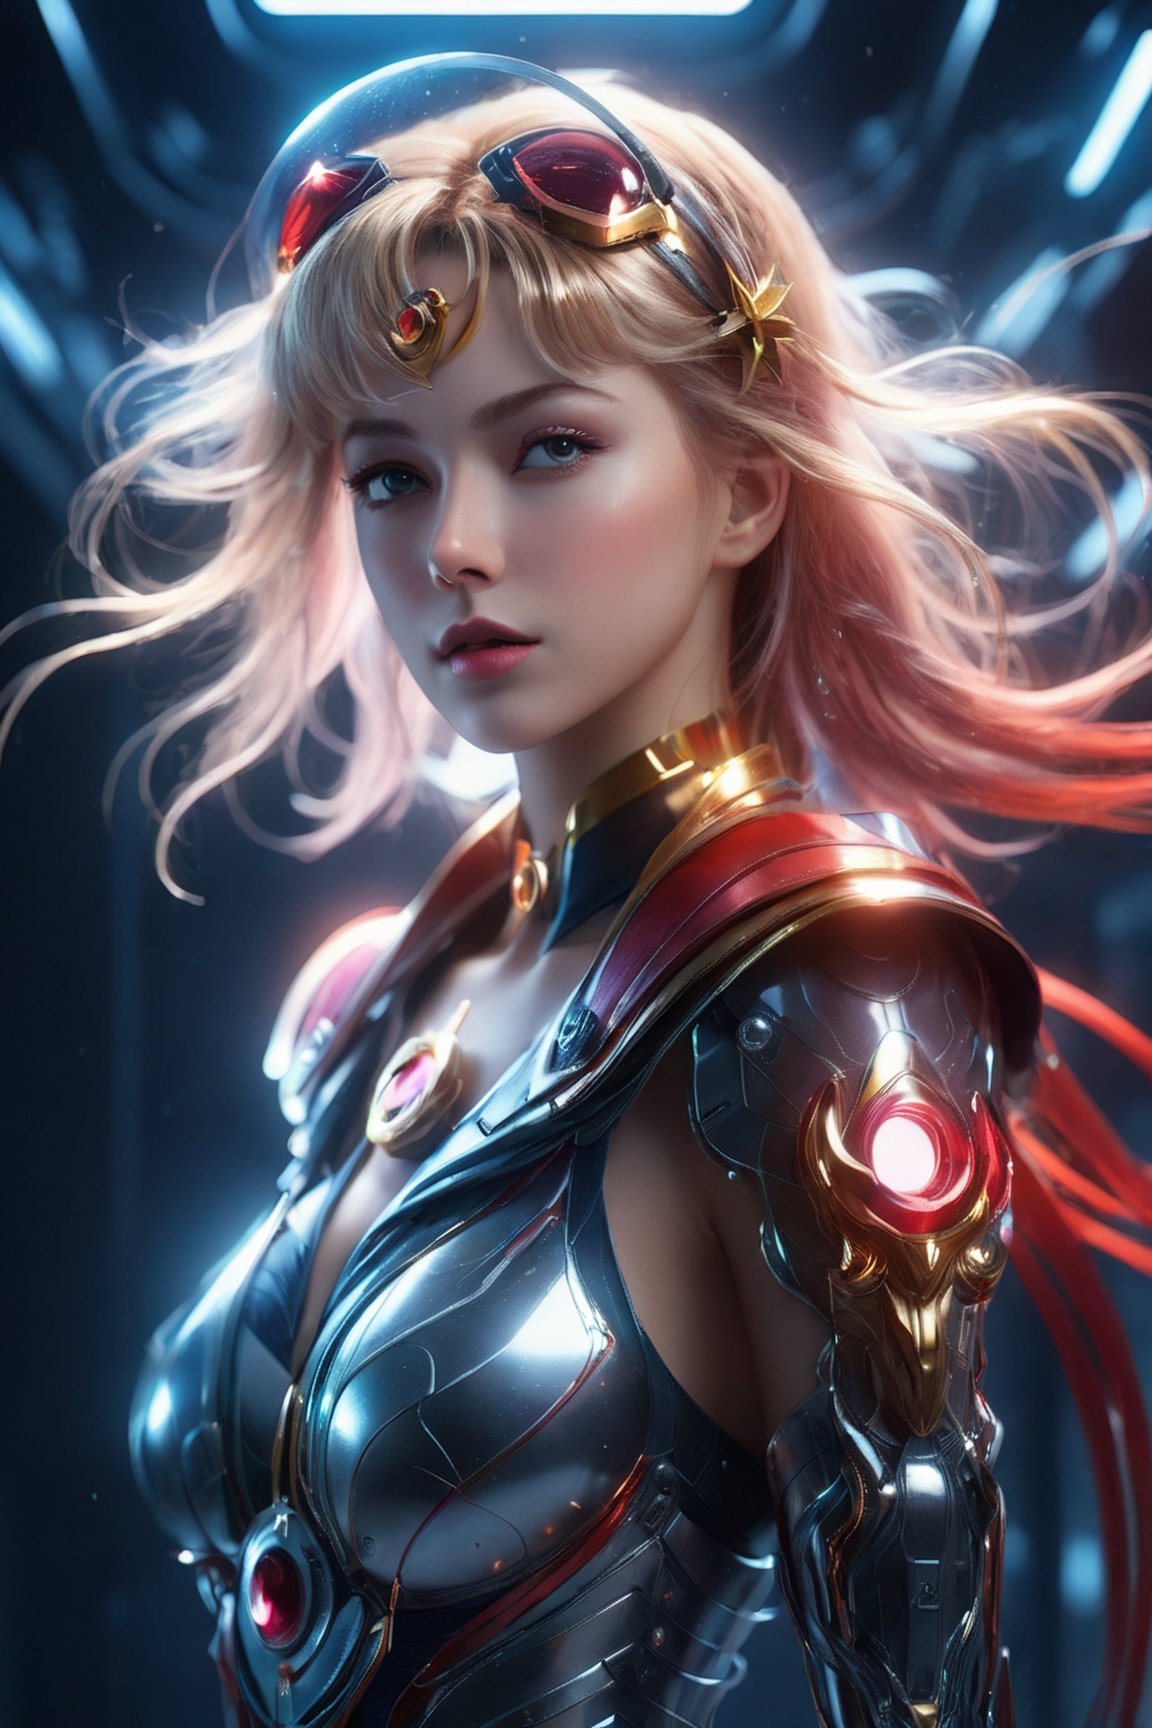 (wide_angle _view, full_body_shot), (zero gravity, weightlessness, floating in space, floating_hair), Beautiful sailor saturn in a red eflective robotic suit,red body,red chest,red long hair, cyborg style, Xenia Tchoumitcheva/Franziska Knuppe hybrid, (in space, stars, space battle, starships, light rails, light particles), 8k resolution concept art portrait by Greg Rutkowski, Artgerm, WLOP, random neon holographic, prismatic, dynamic lighting hyperdetailed intricately detailed Splash art trending on Artstation Unreal Engine 5 volumetric lighting golden ratio dynamic lighting retrofuturism cyberpunk 8k resolution synthwave vaporwave solarpunk futuristic retrofuturism, ,bingnvwang,sailor_moon